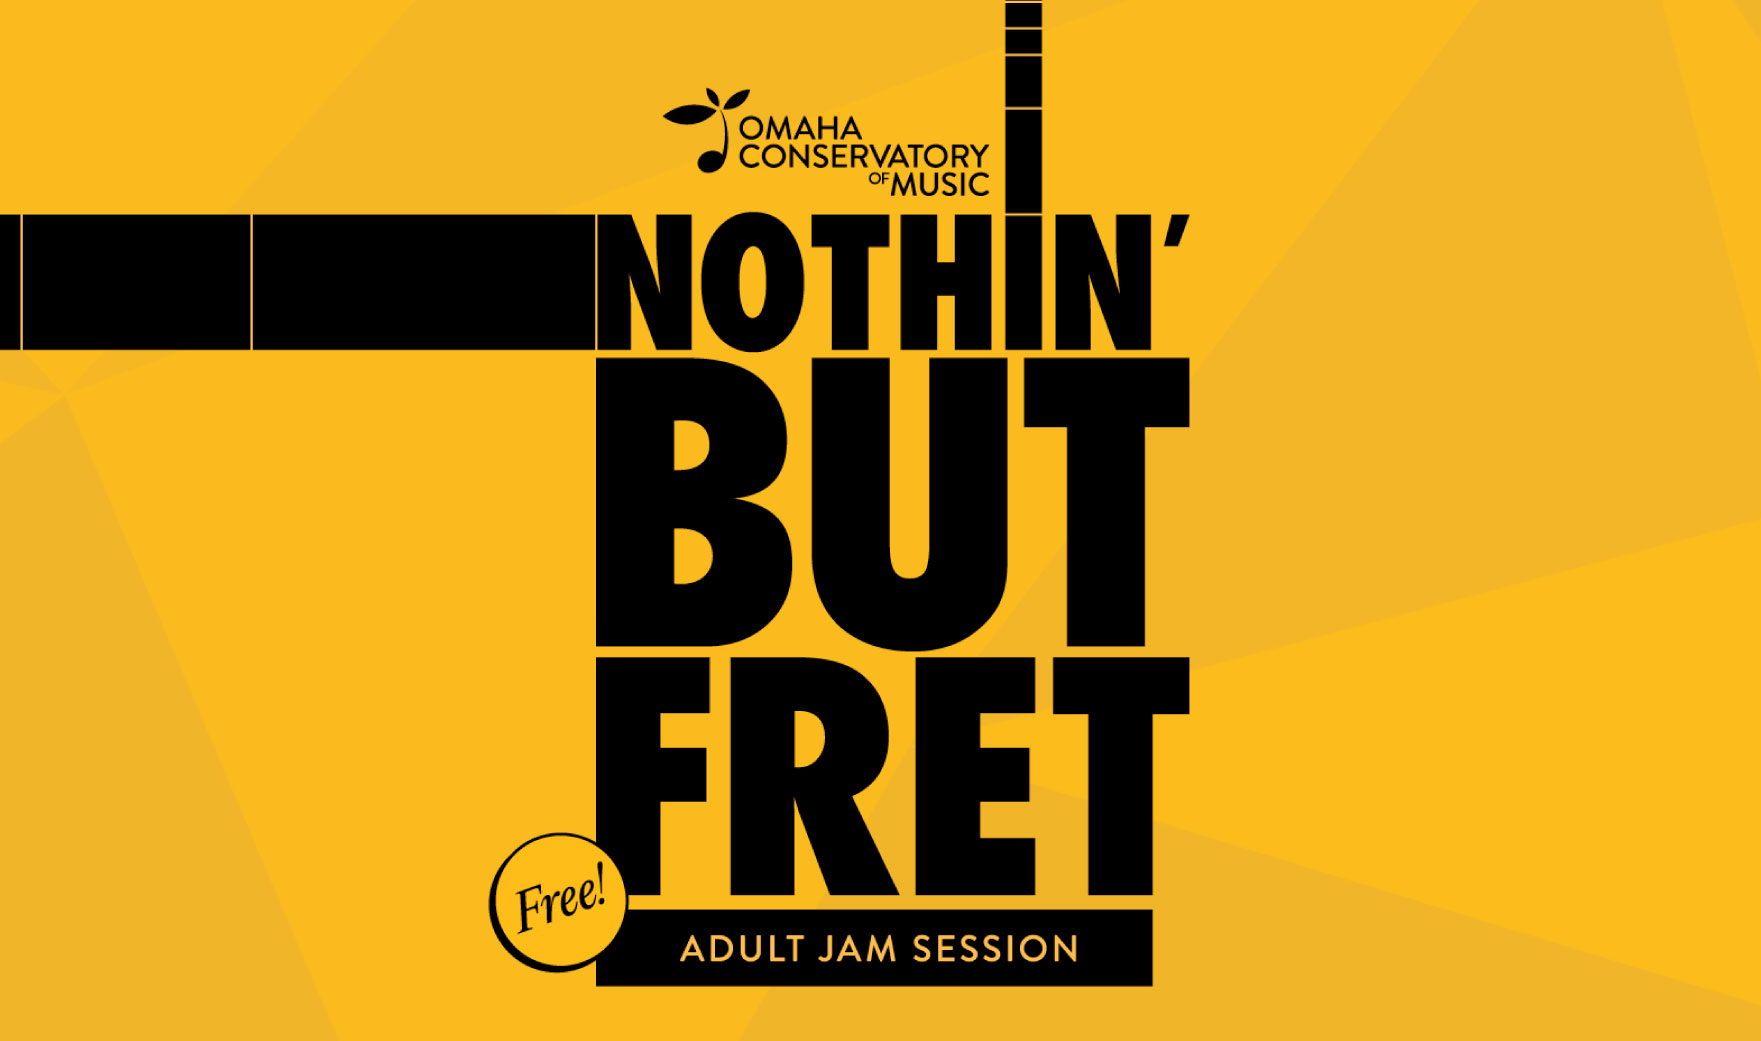 Black text on a gold background reading: "Omaha Conservatory of Music; Nothin' But Fret; Free Adult Jam Session"